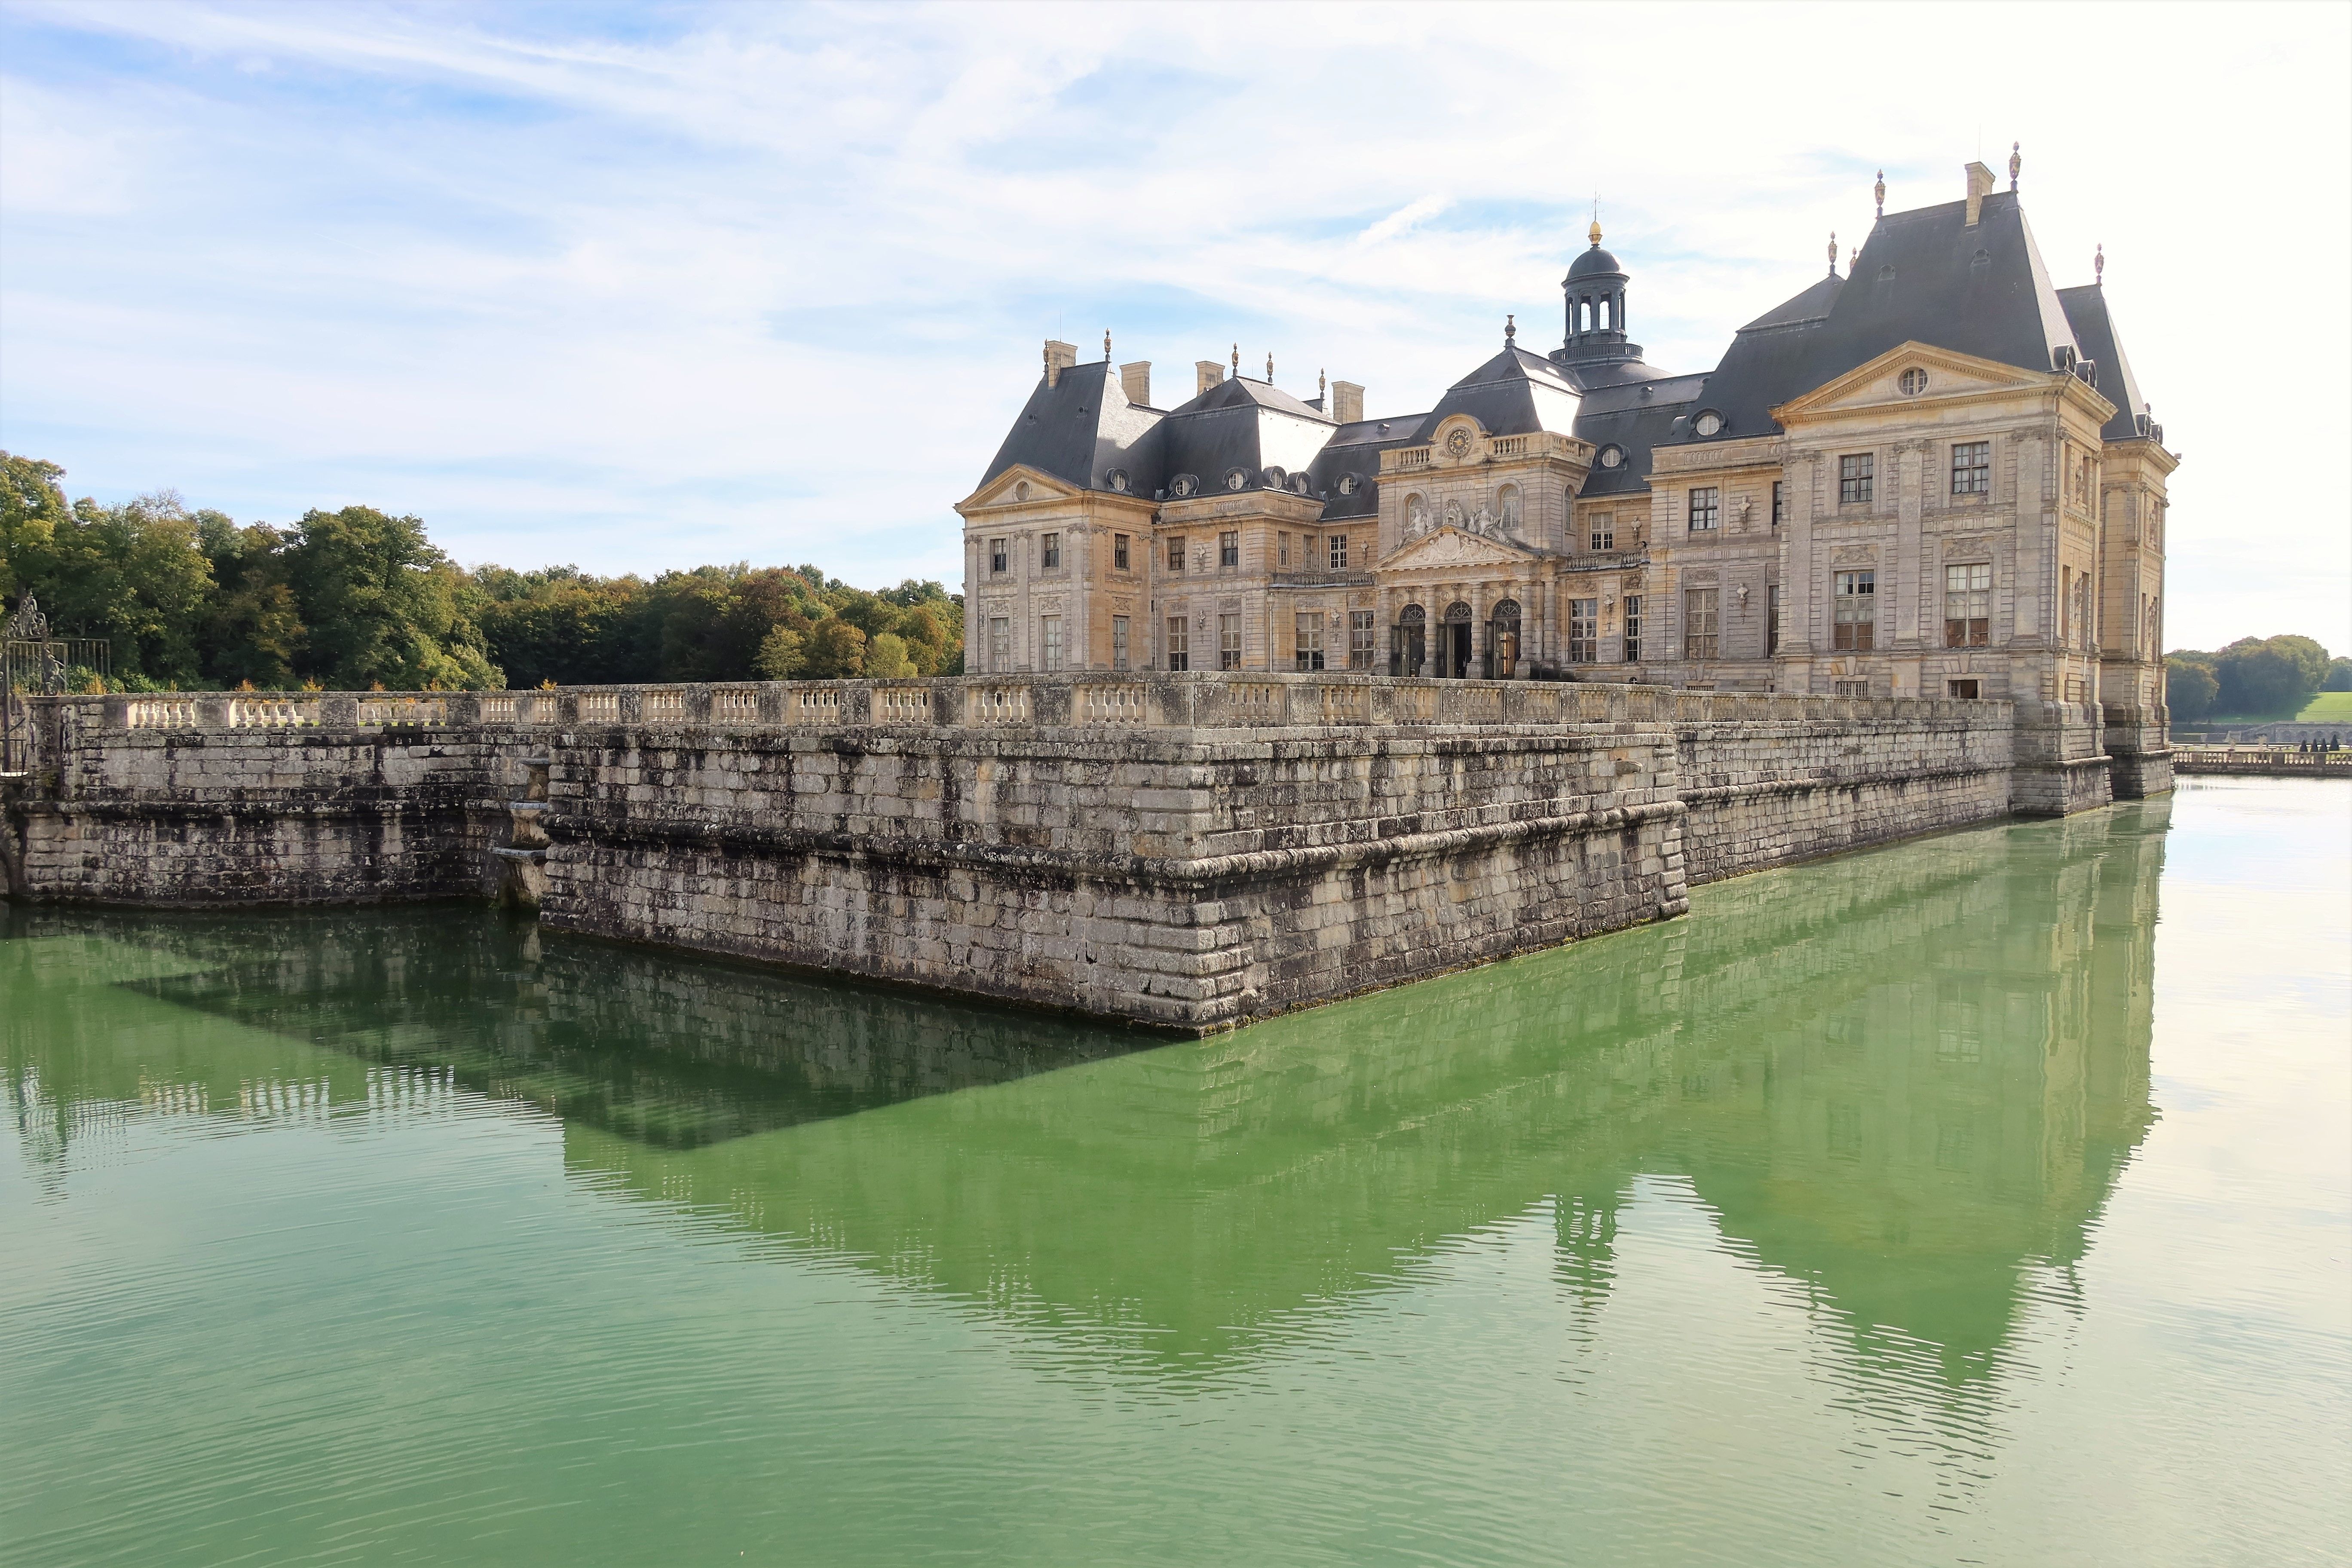 Château de Vaux-le-Vicomte from water, during day. Photo by Chris Linnett on Unsplash.